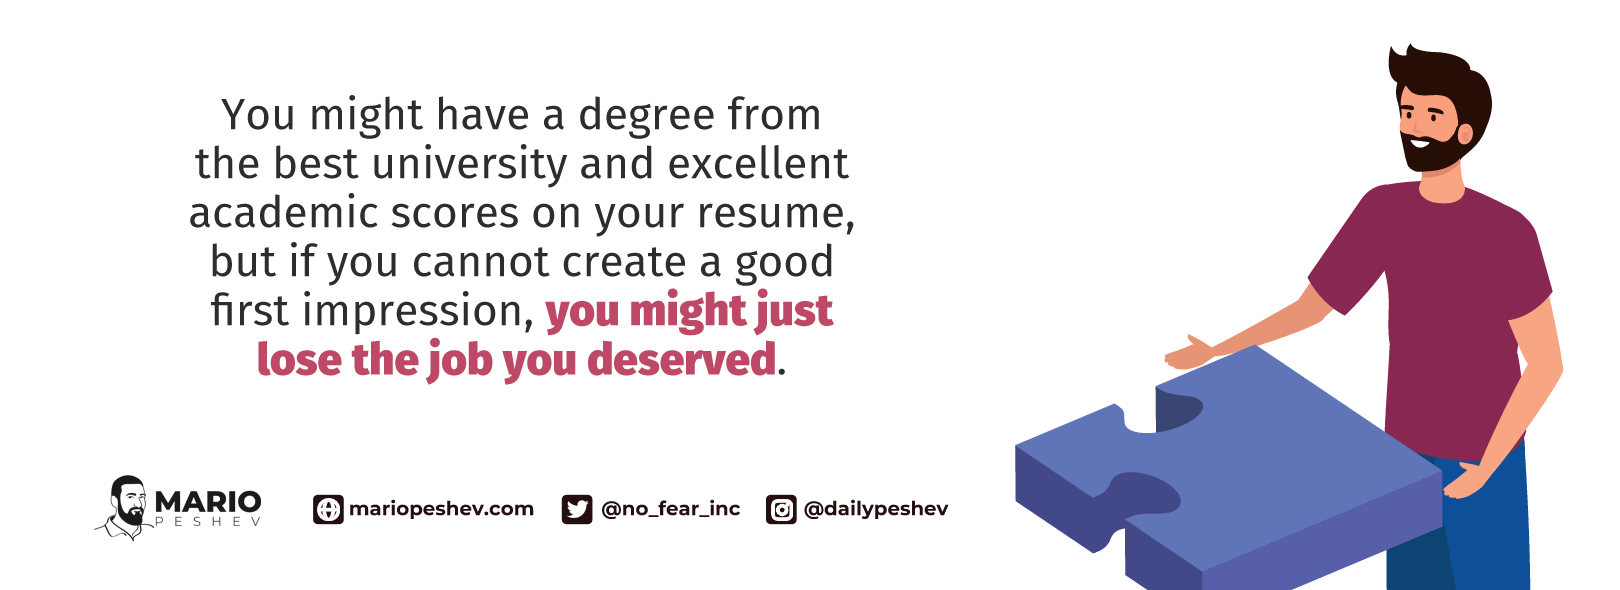 You might have a degree from the best university and excellent academic scores on your resume, but if you cannot create a good first impression, you might just lose the job you deserved.